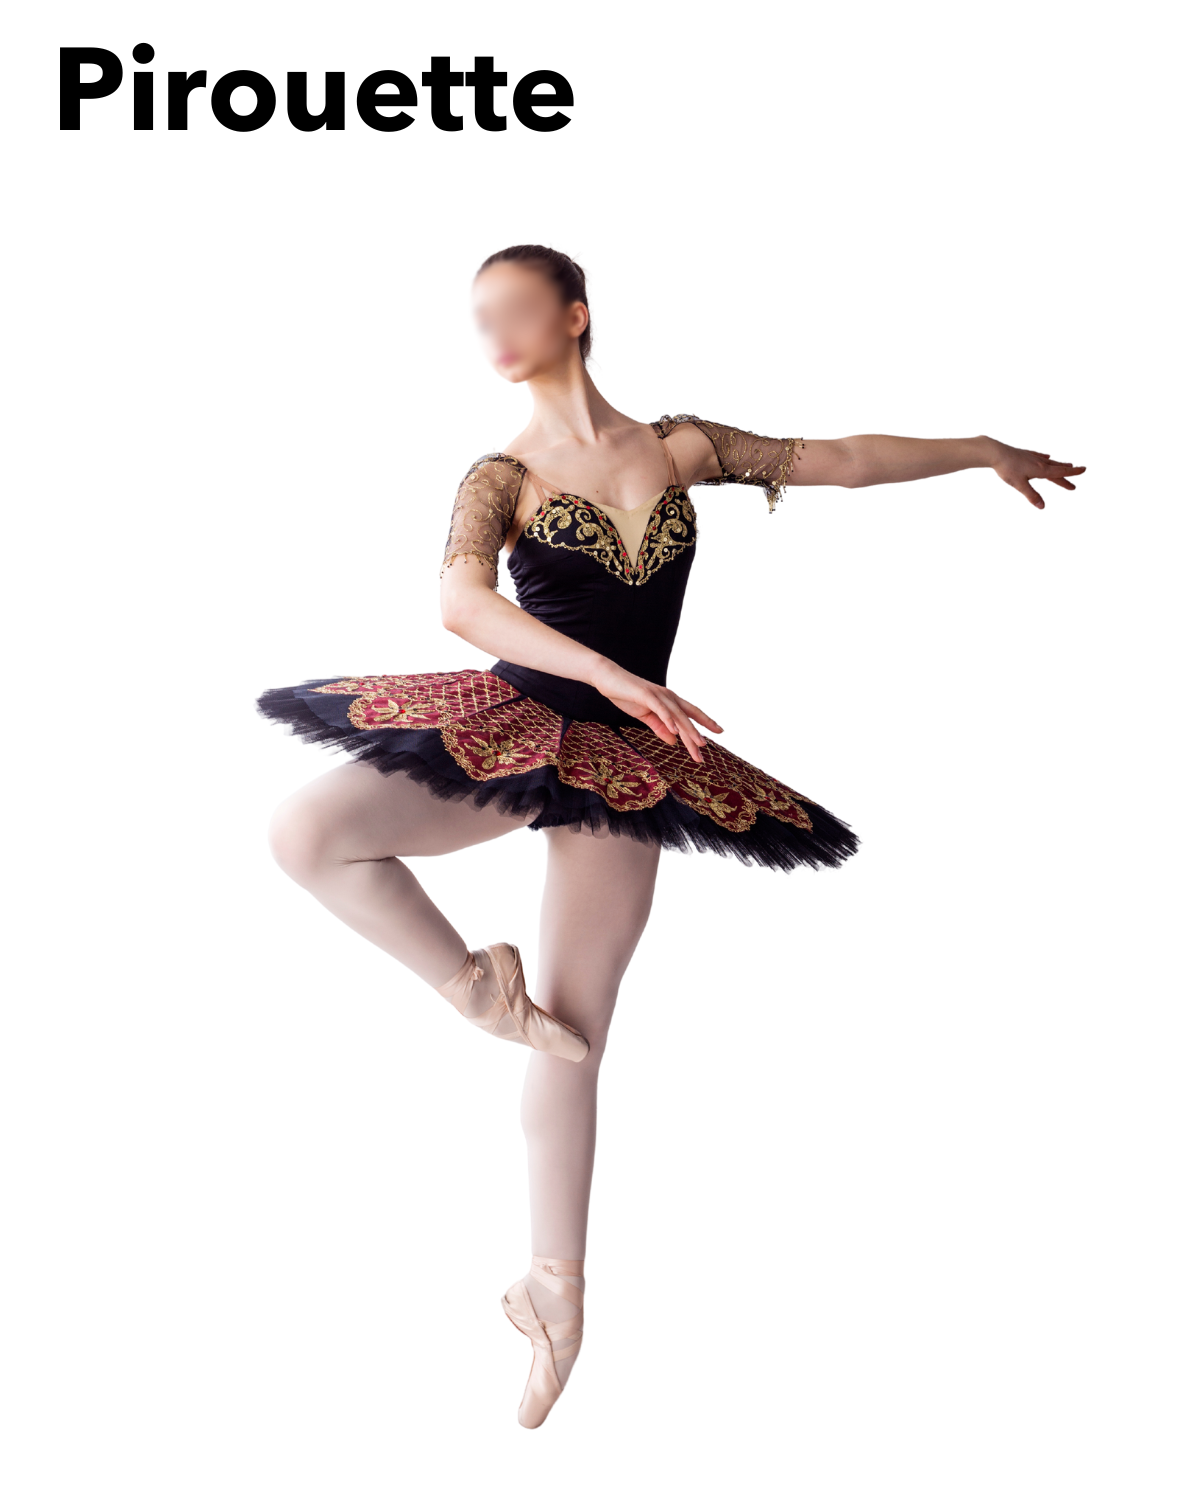 Ballet Positions of the Arms and Feet with @ti-and-me - YouTube